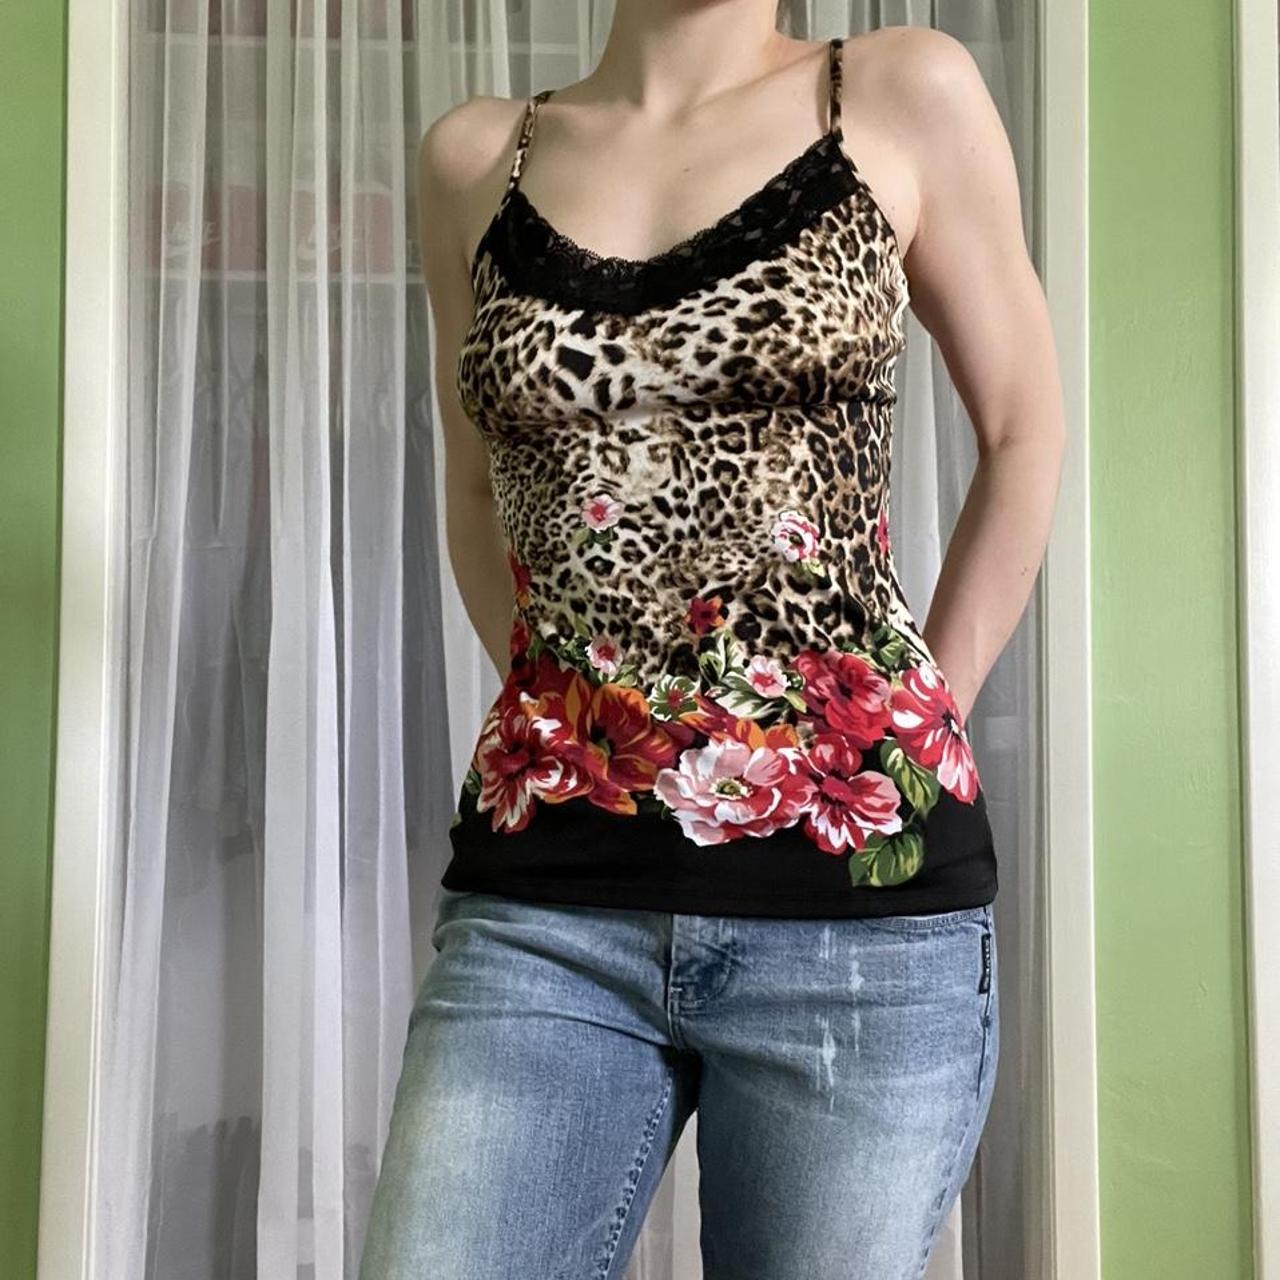 Product Image 1 - CHEETAH FLORAL LACEY TANK TOP

-